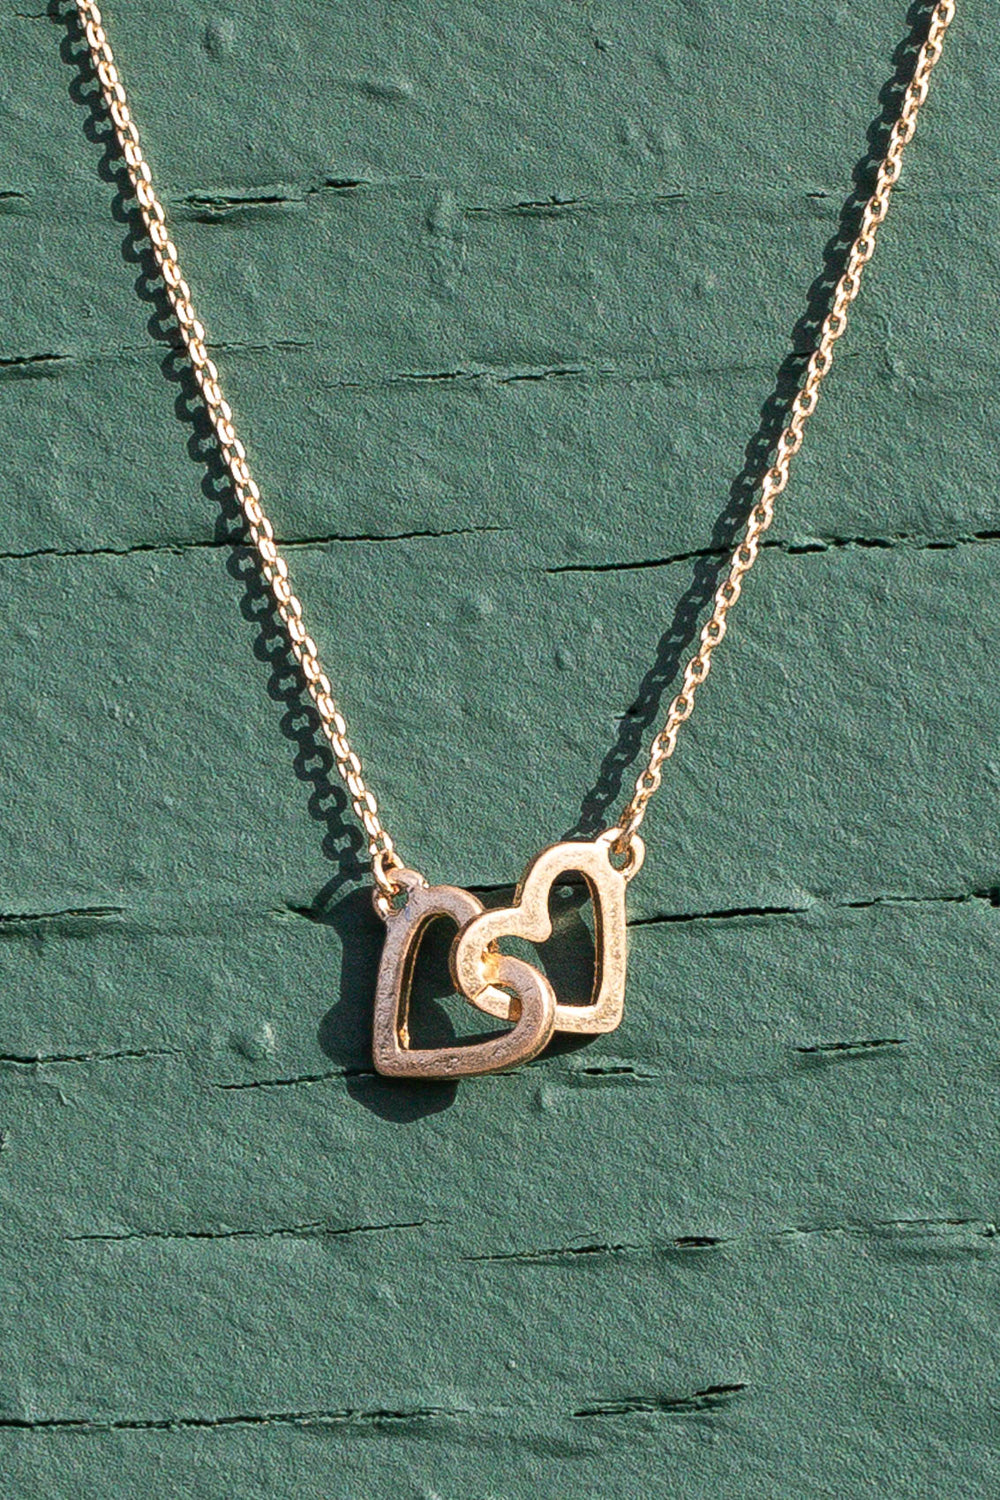 Relax Necklace Heart Necklace Infinity Necklace Love Knot Necklace